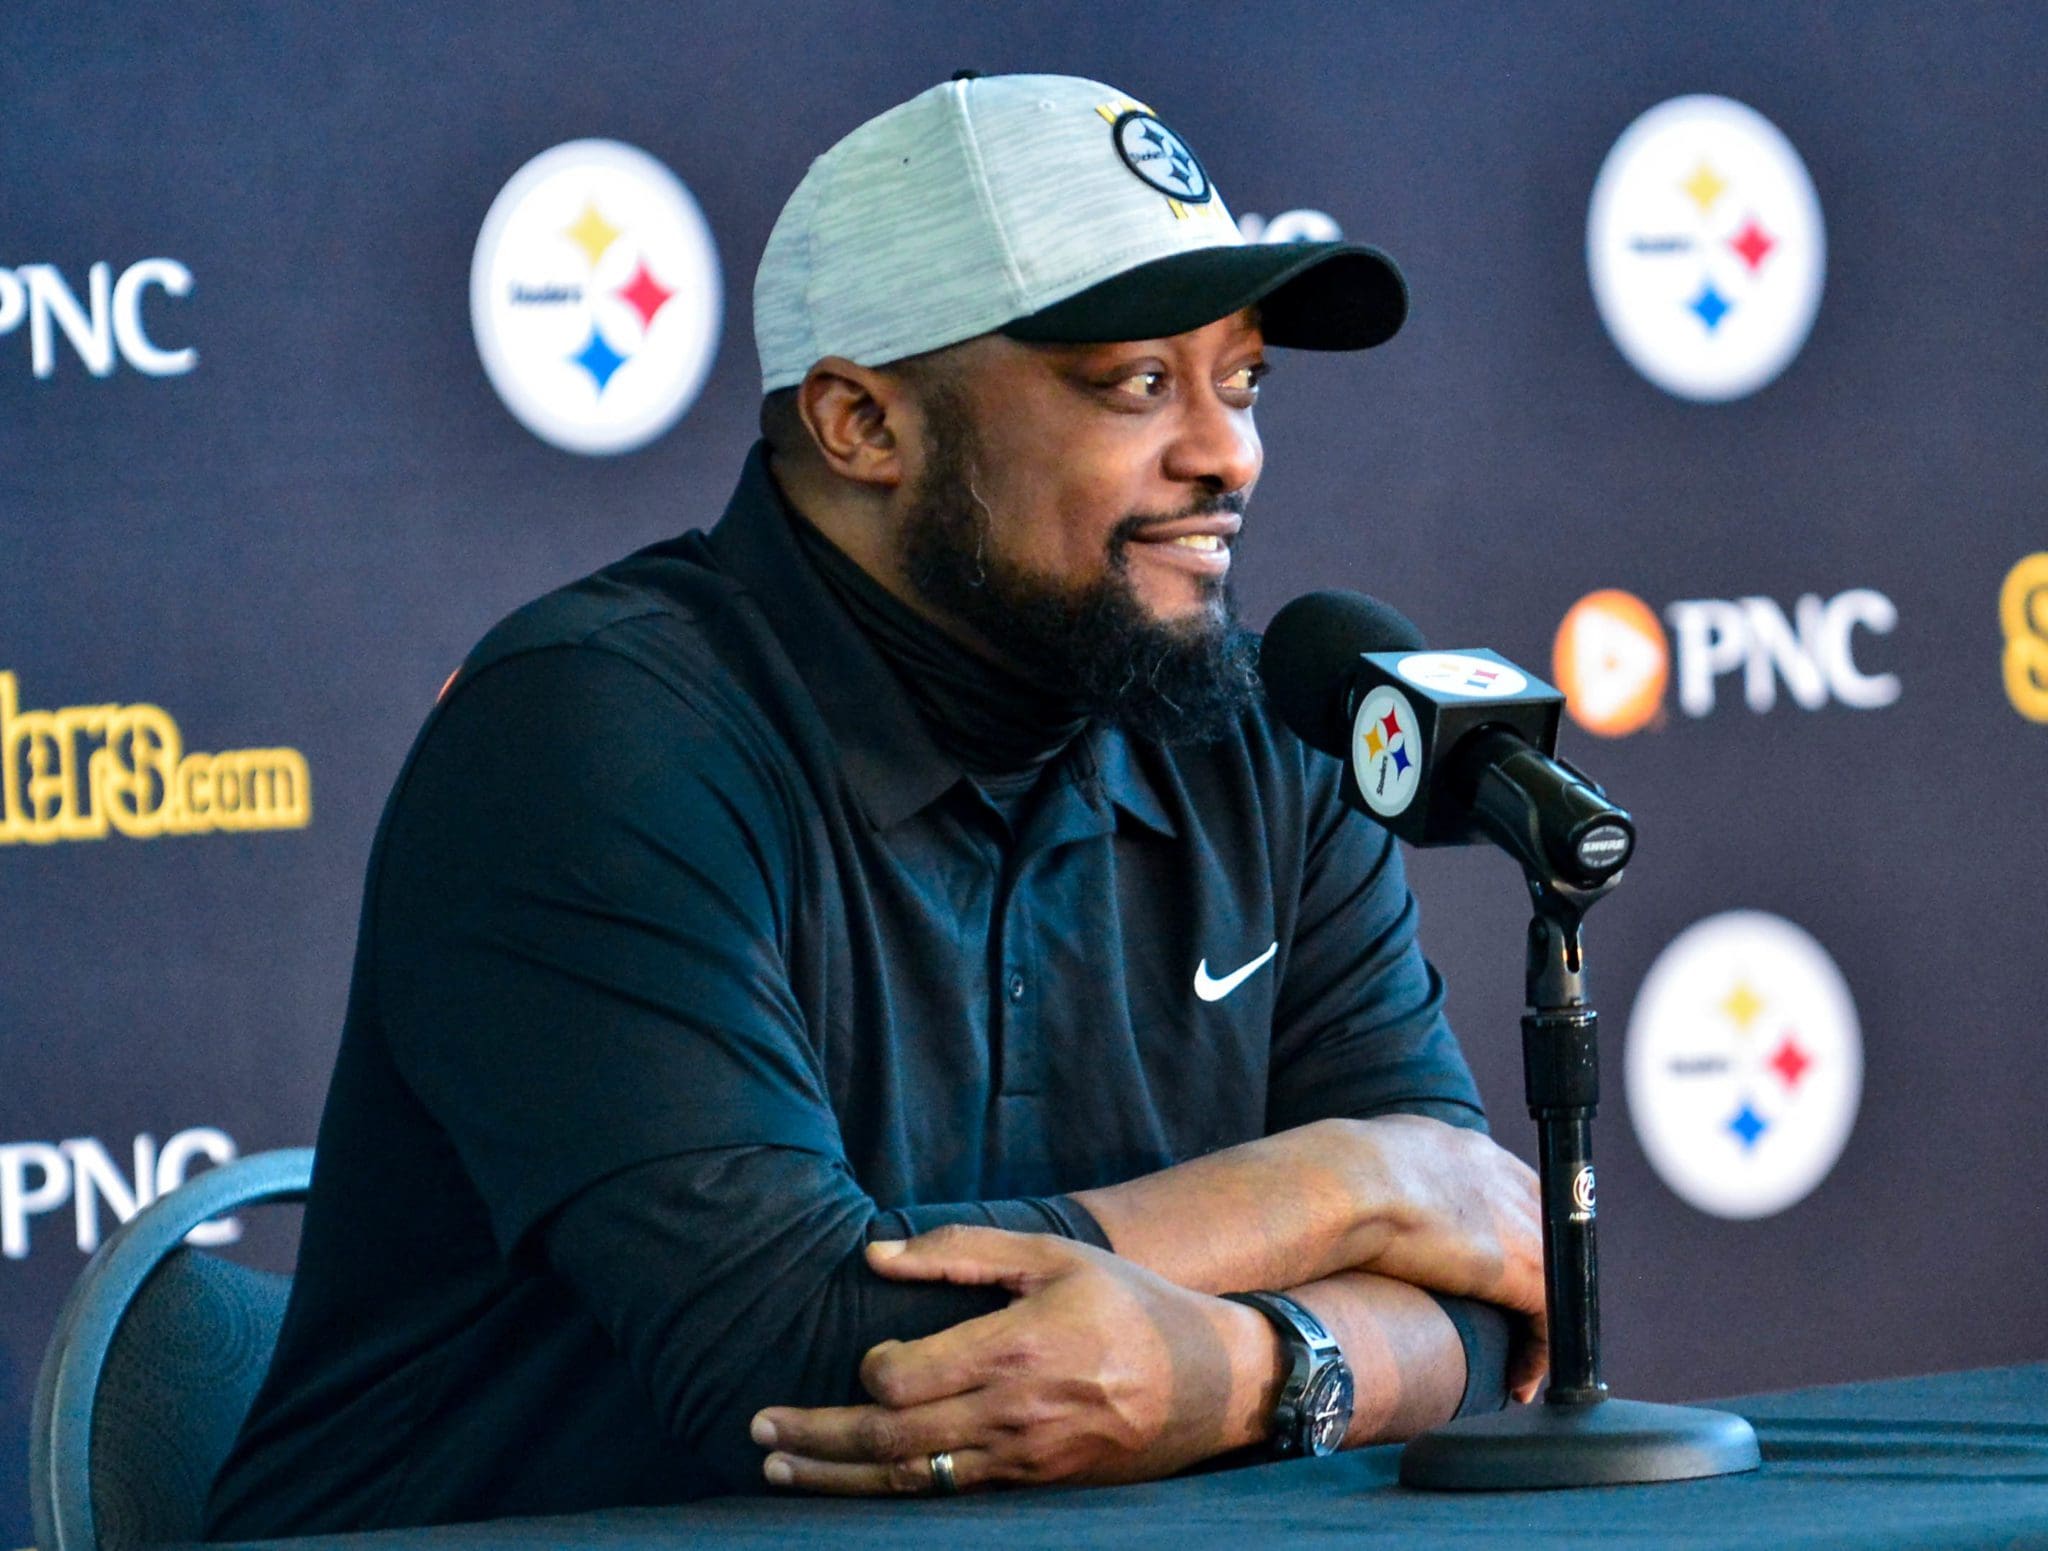 Mike Tomlin wearing a black jacket and gray cap